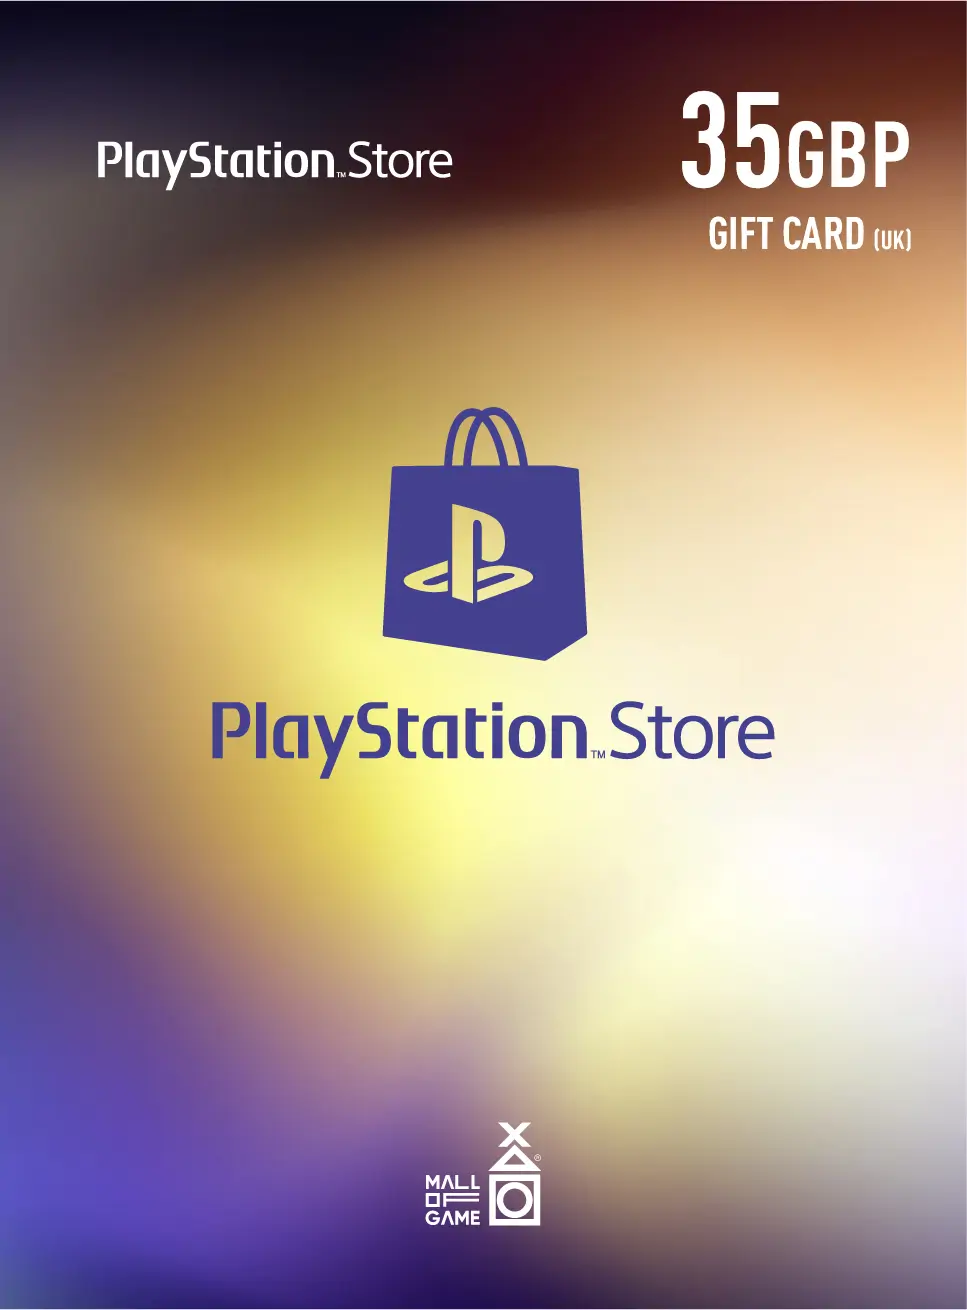 PlayStation™Store GBP35 Gift Cards (UK)